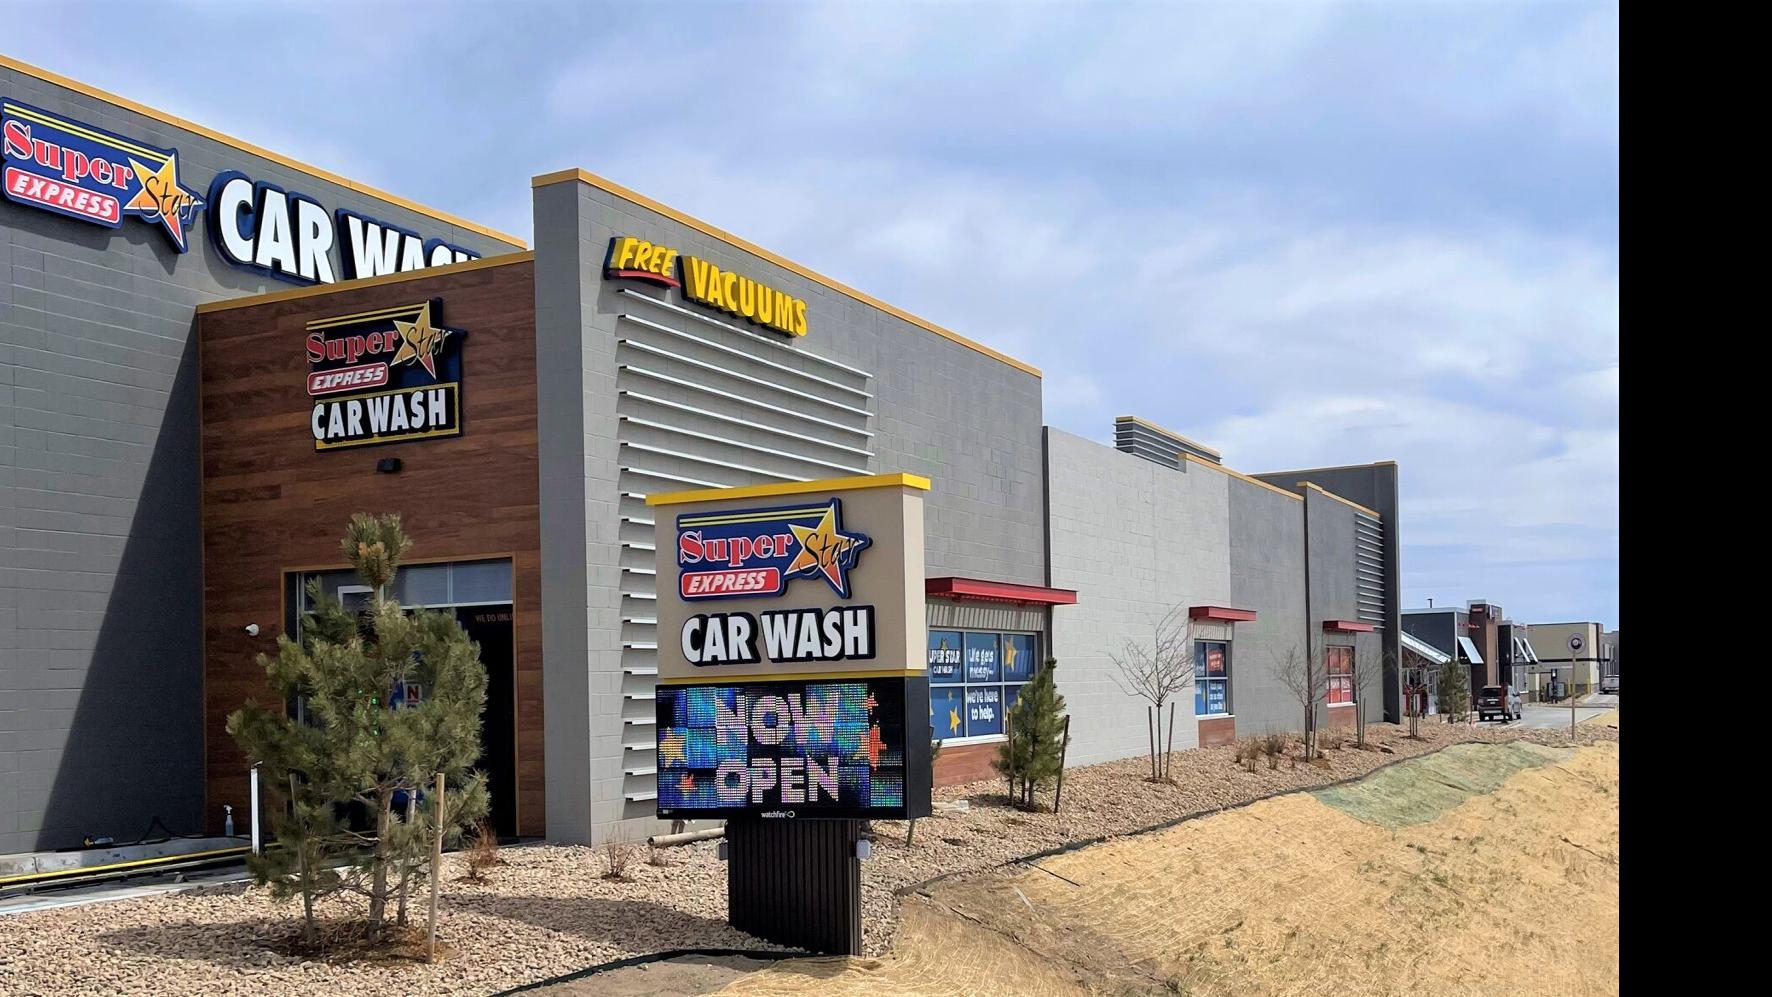 Super Star Car Wash - From $26.07